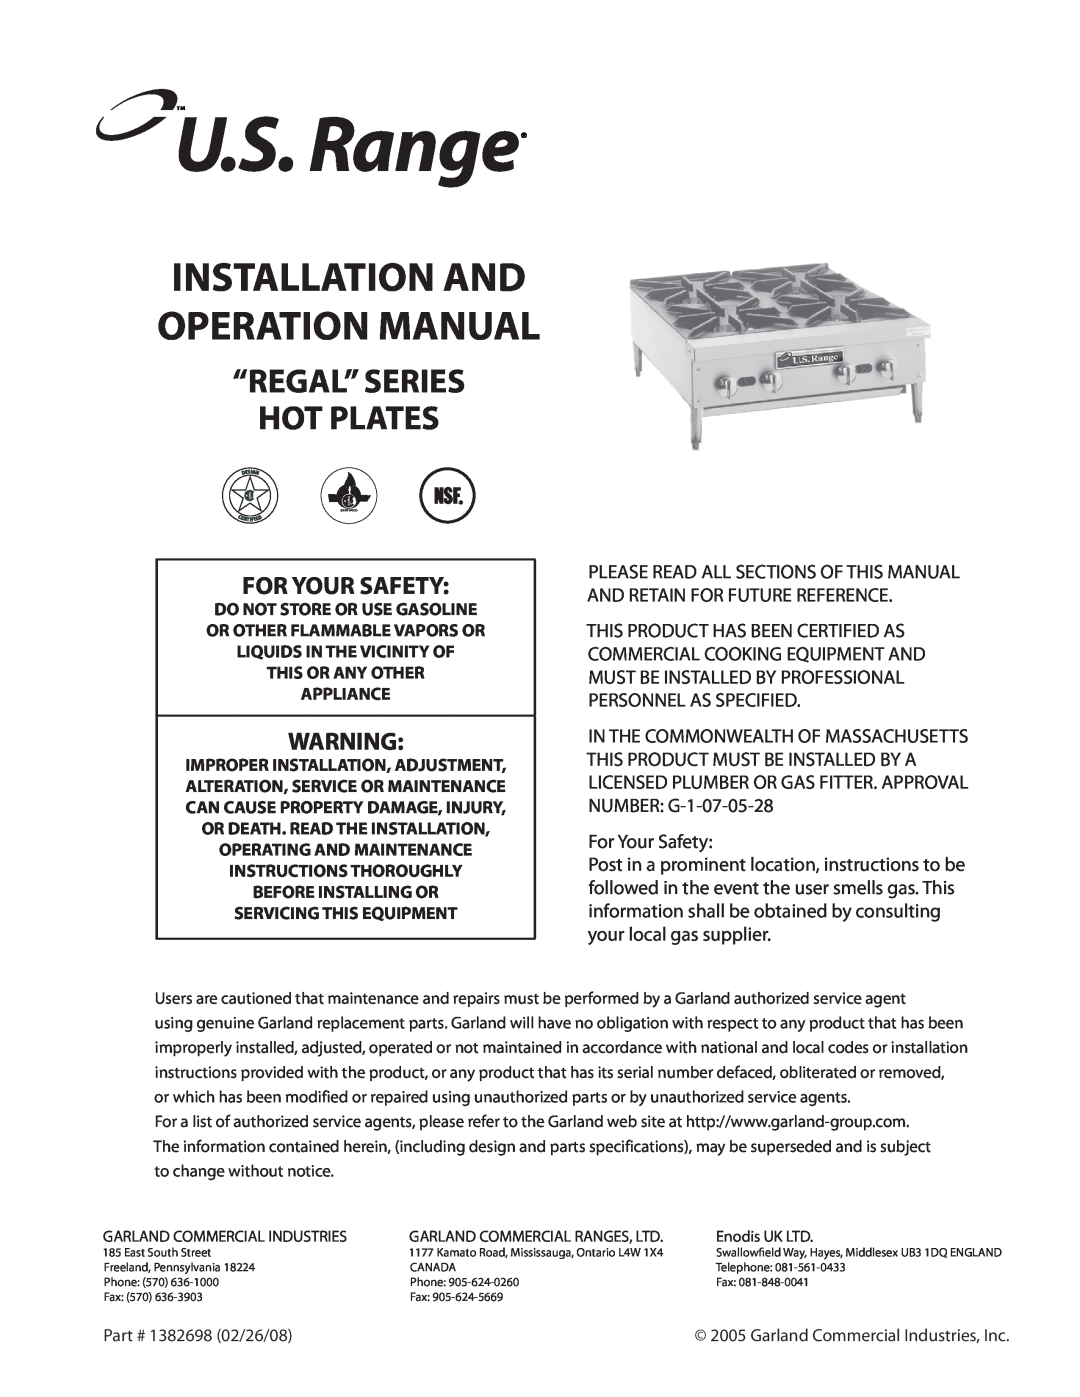 Garland Regal Series operation manual “Regal” Series Hot Plates, For Your Safety, This Or Any Other Appliance 